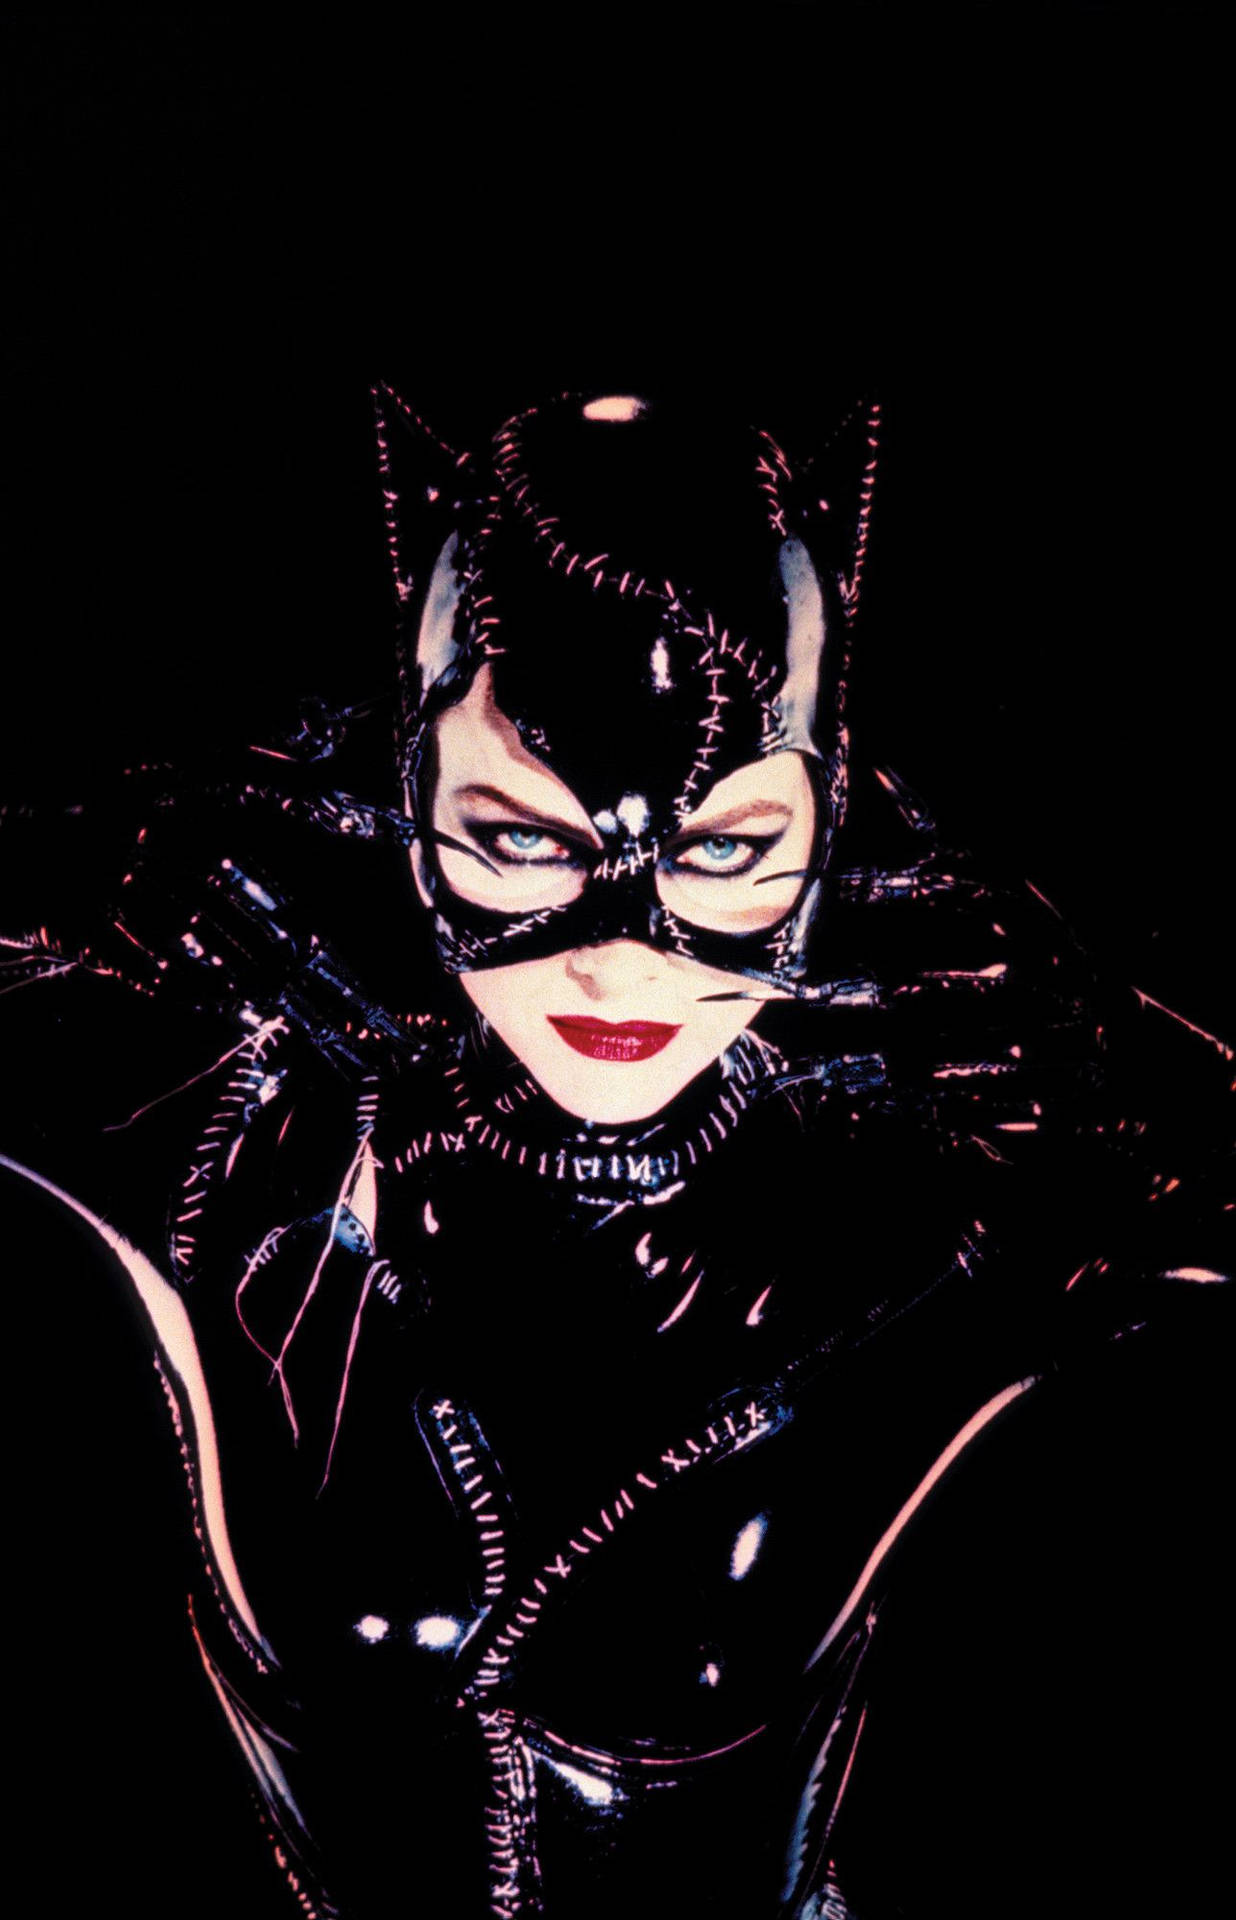 Michelle Pfeiffer As Catwoman